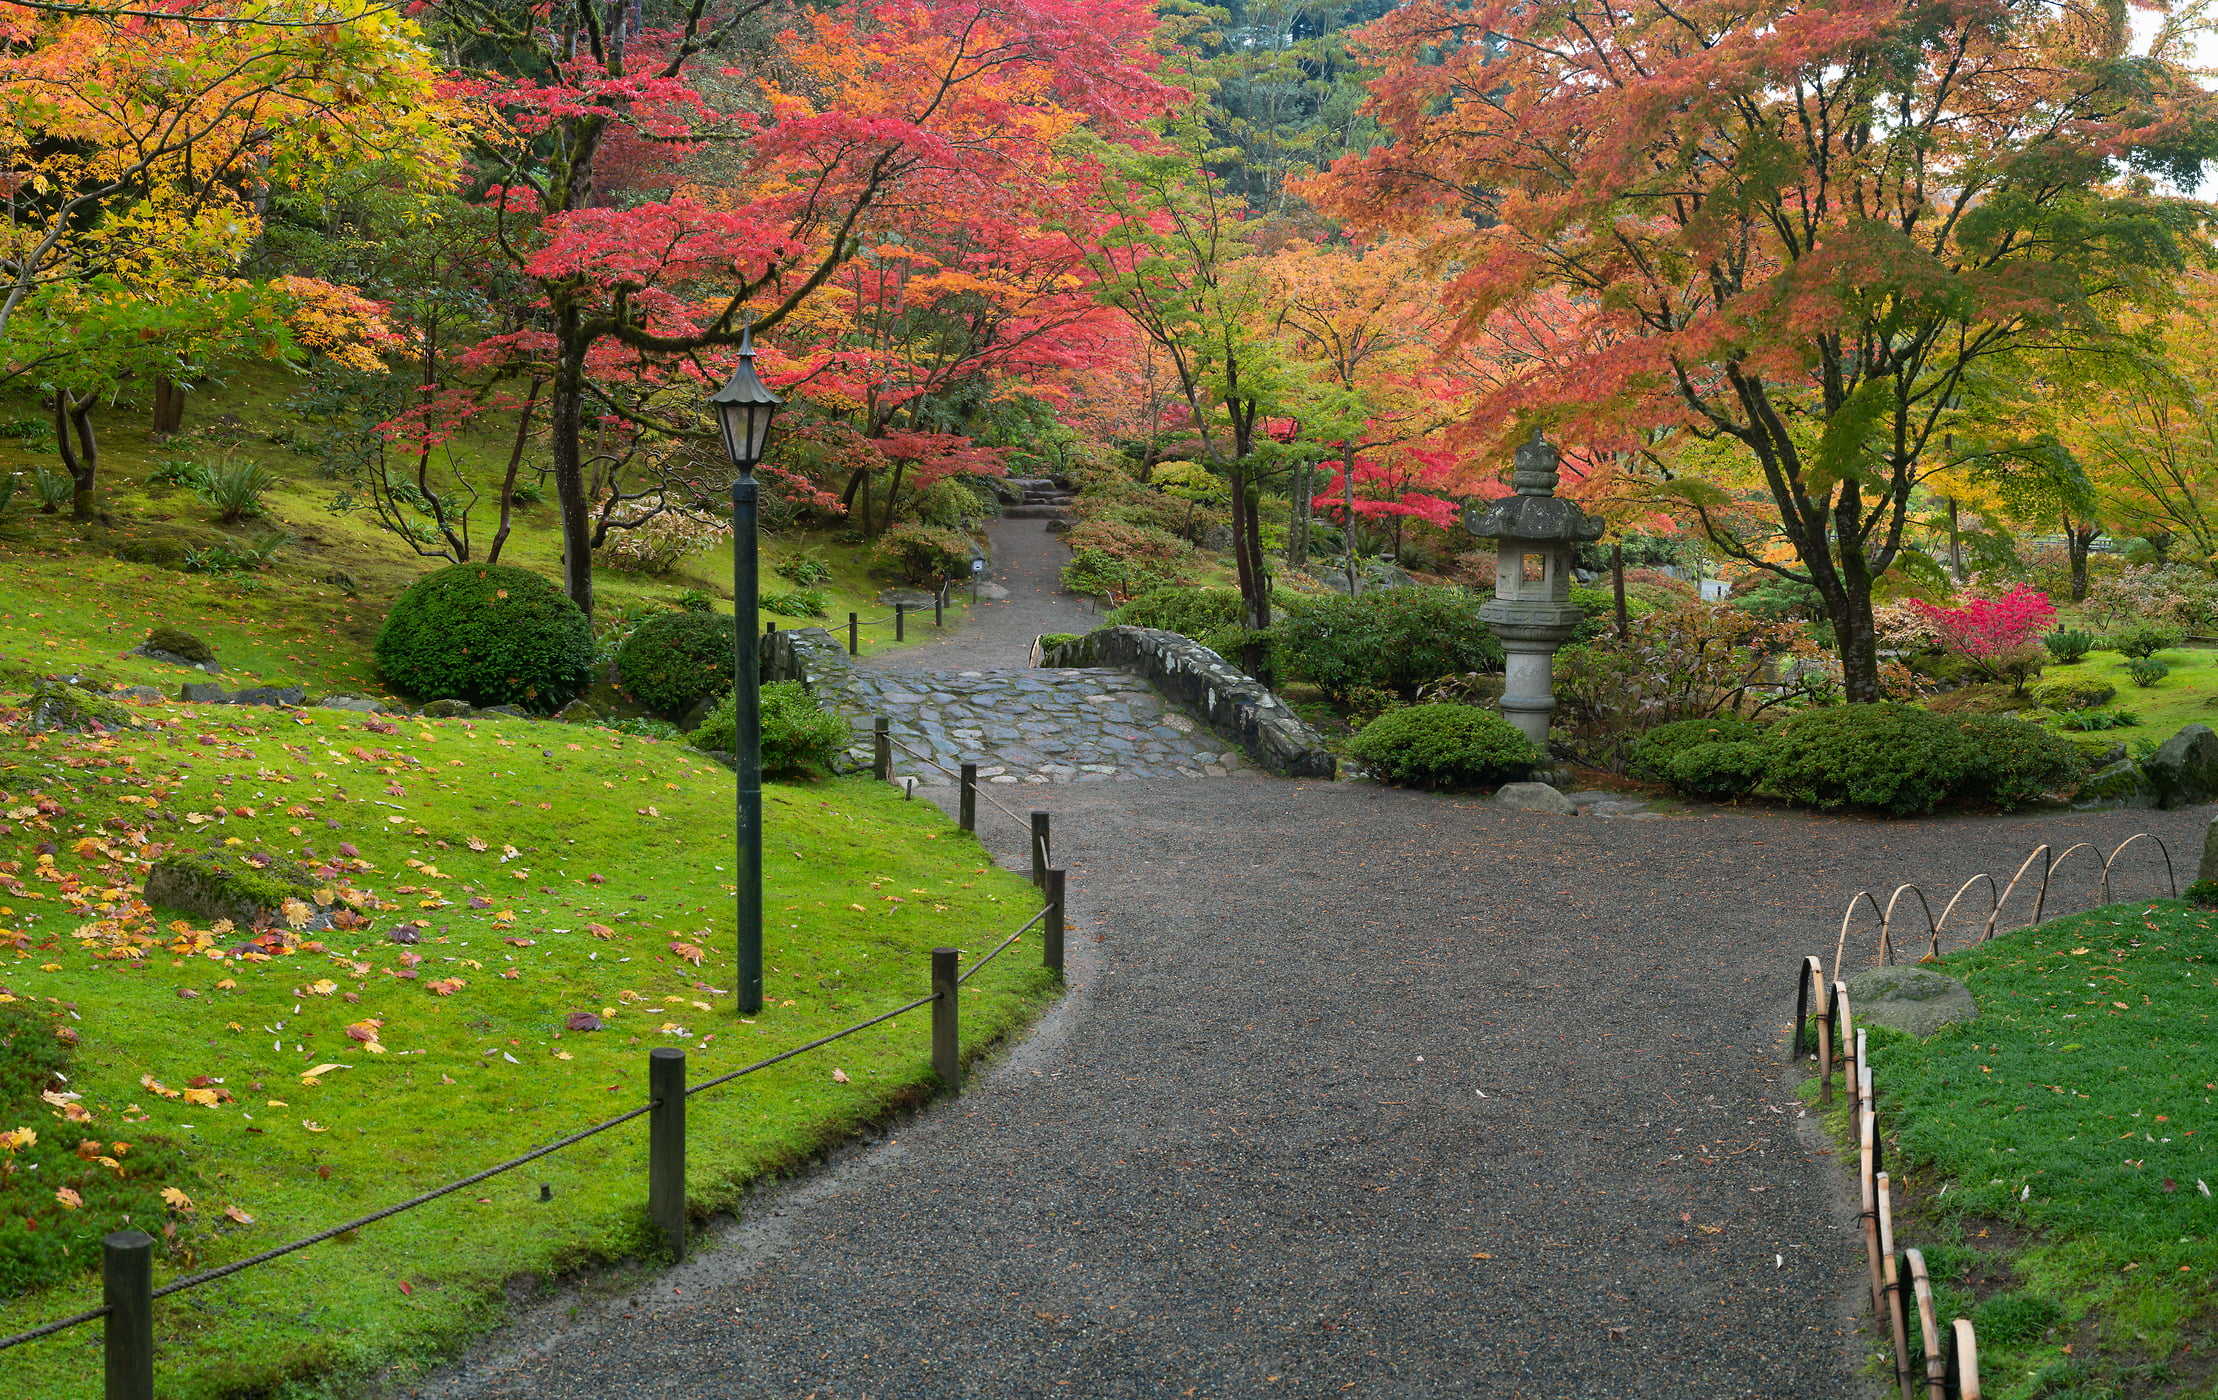 306 megapixels! A very high resolution, large-format VAST photo print of a colorful Japanese garden with fall foliage and a walkway; nature photograph created by Greg Probst in Japanese Garden, Seattle, WA.